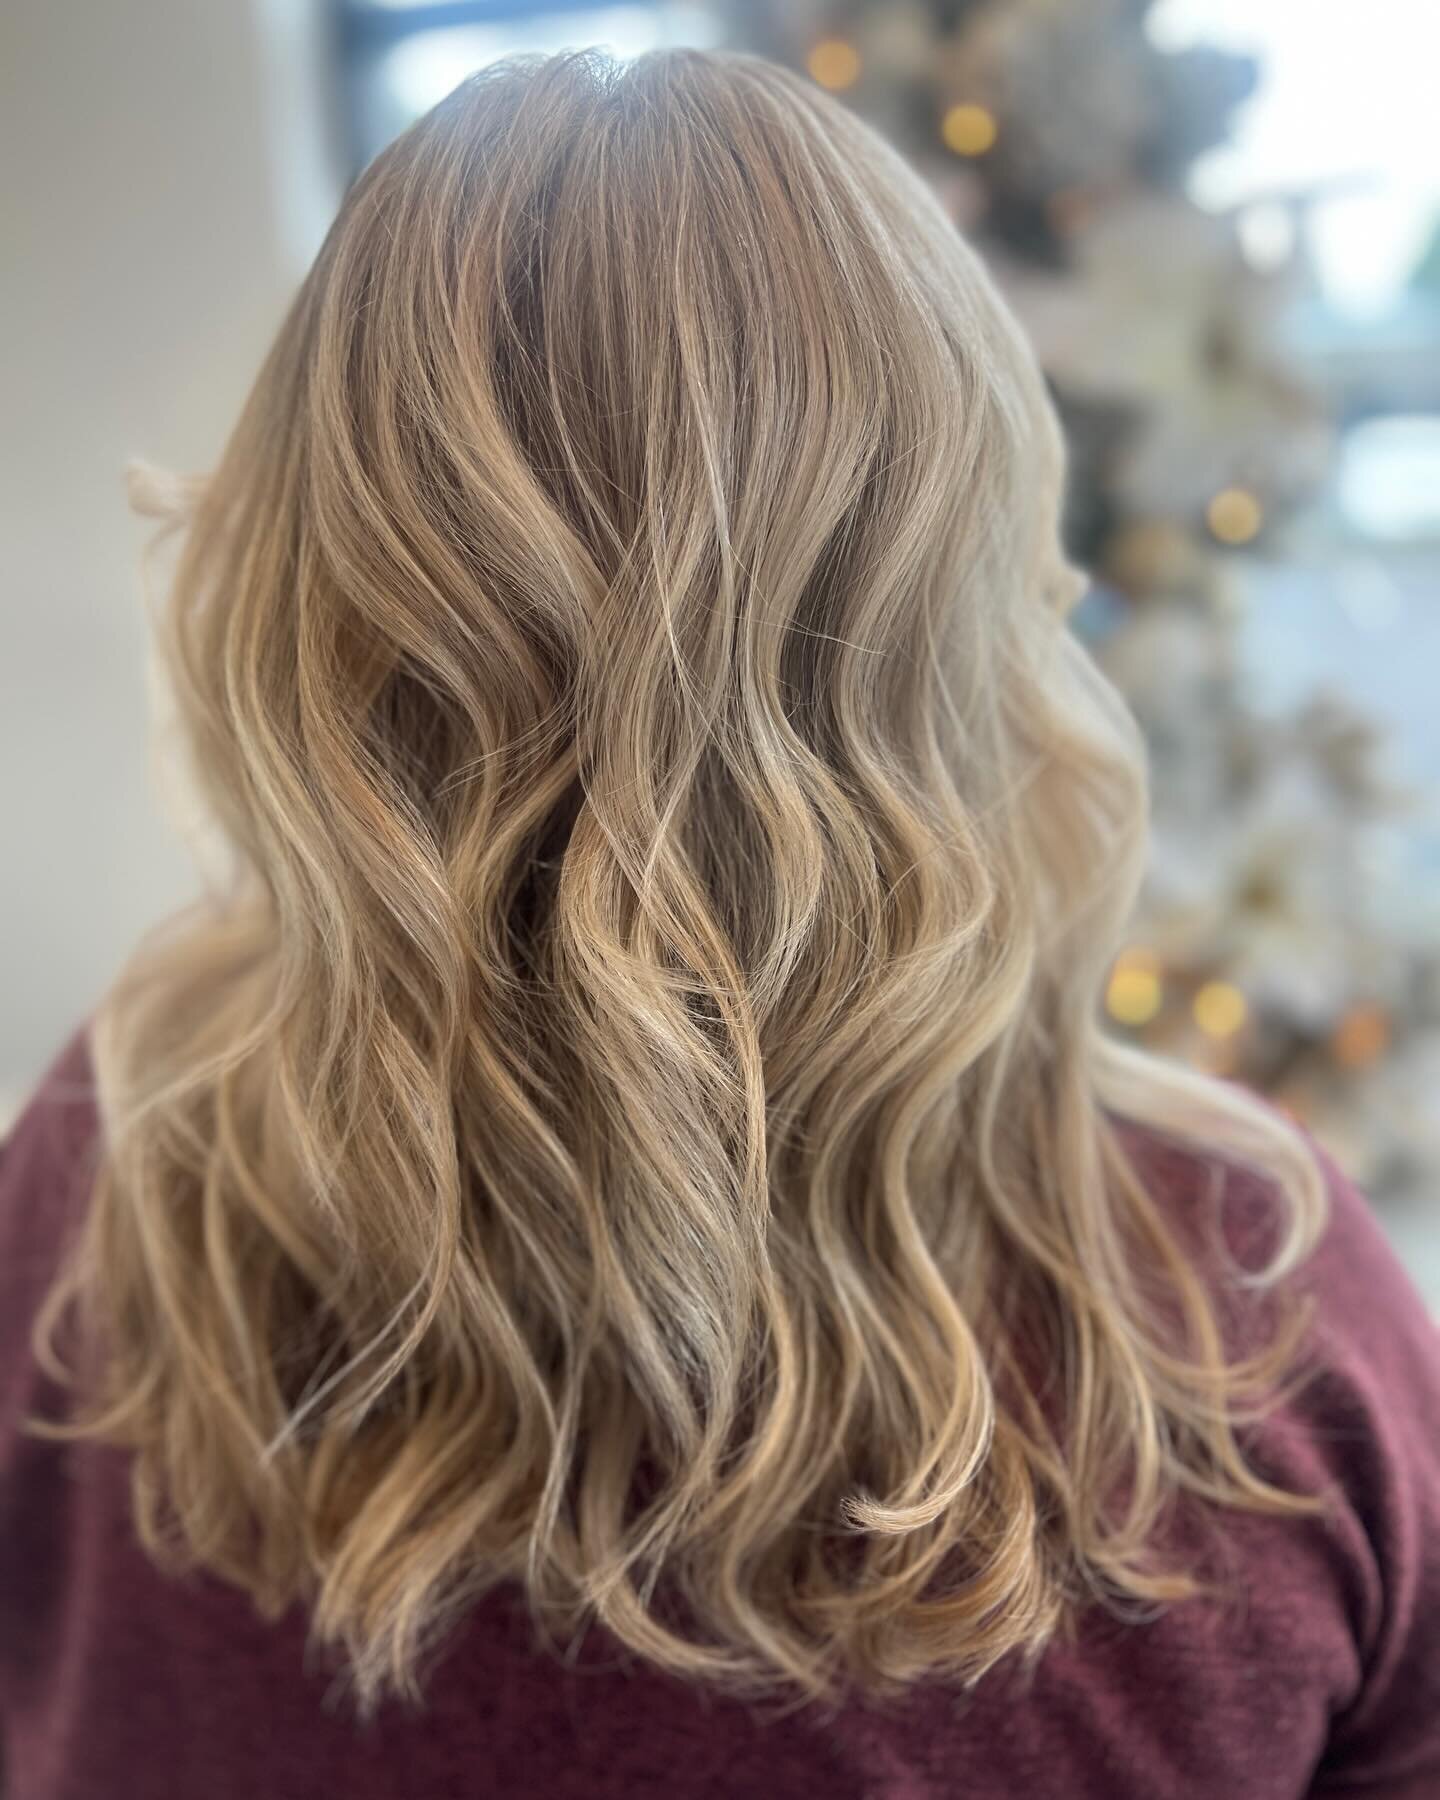 This blonde is perfection 🤍
Done by our foil specialist @vee.styles_ she never misses! 🫶🏽